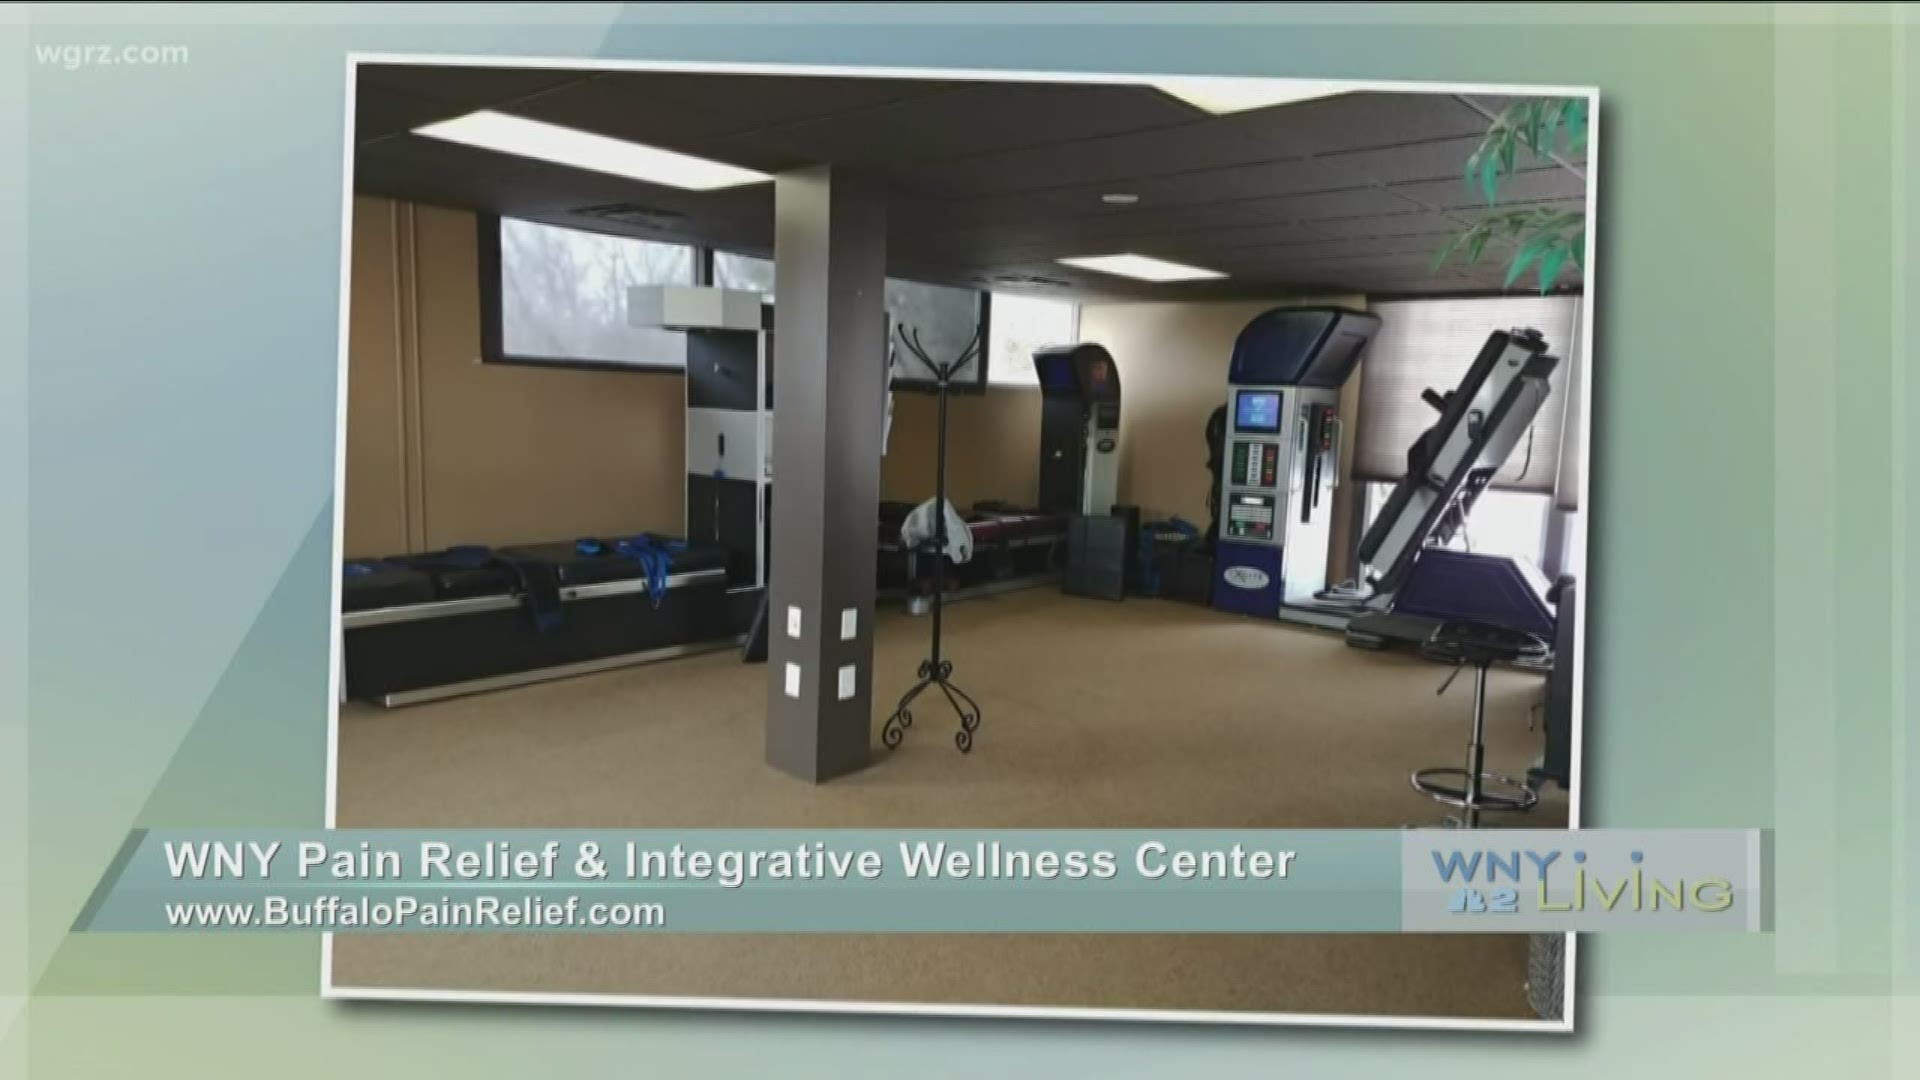 February 22 - WECK WNY Pain Relief (THIS VIDEO IS SPONSORED BY WECK WNY PAIN RELIEF)